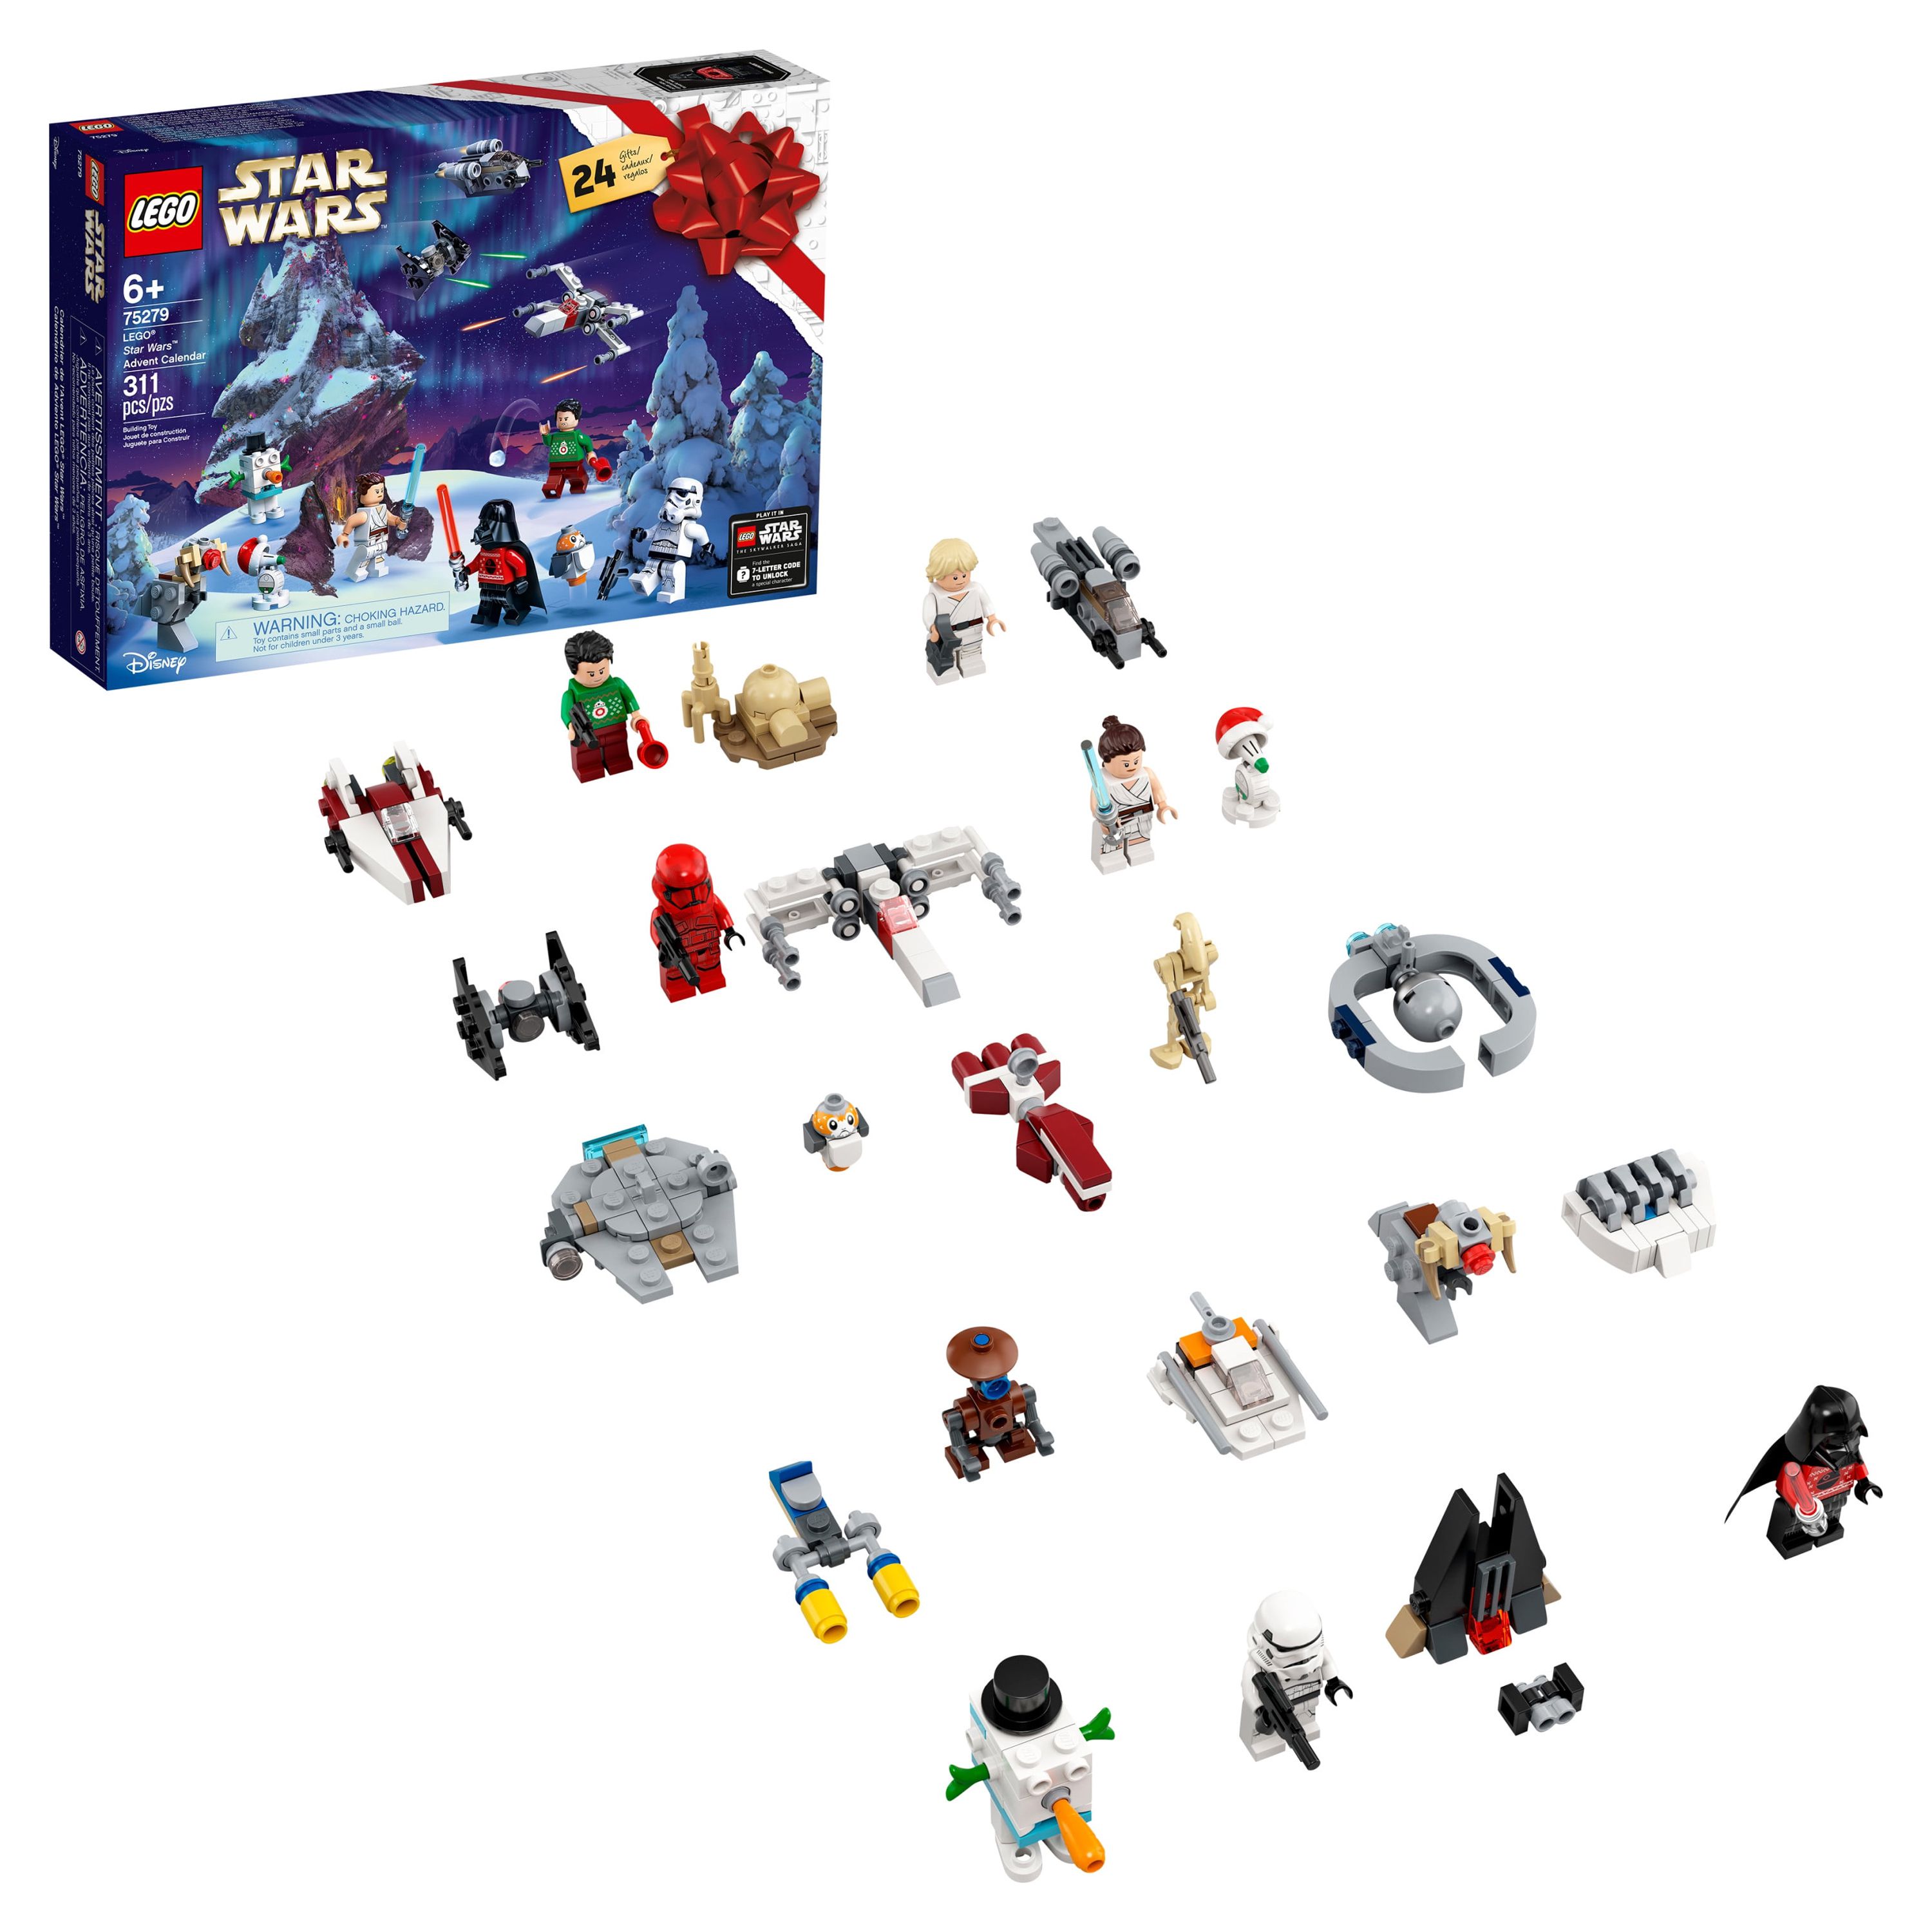 LEGO Star Wars Advent Calendar 75279 Building Kit, Fun Christmas Countdown Calendar with Star Wars Buildable Toys (311 Pieces) - image 1 of 7